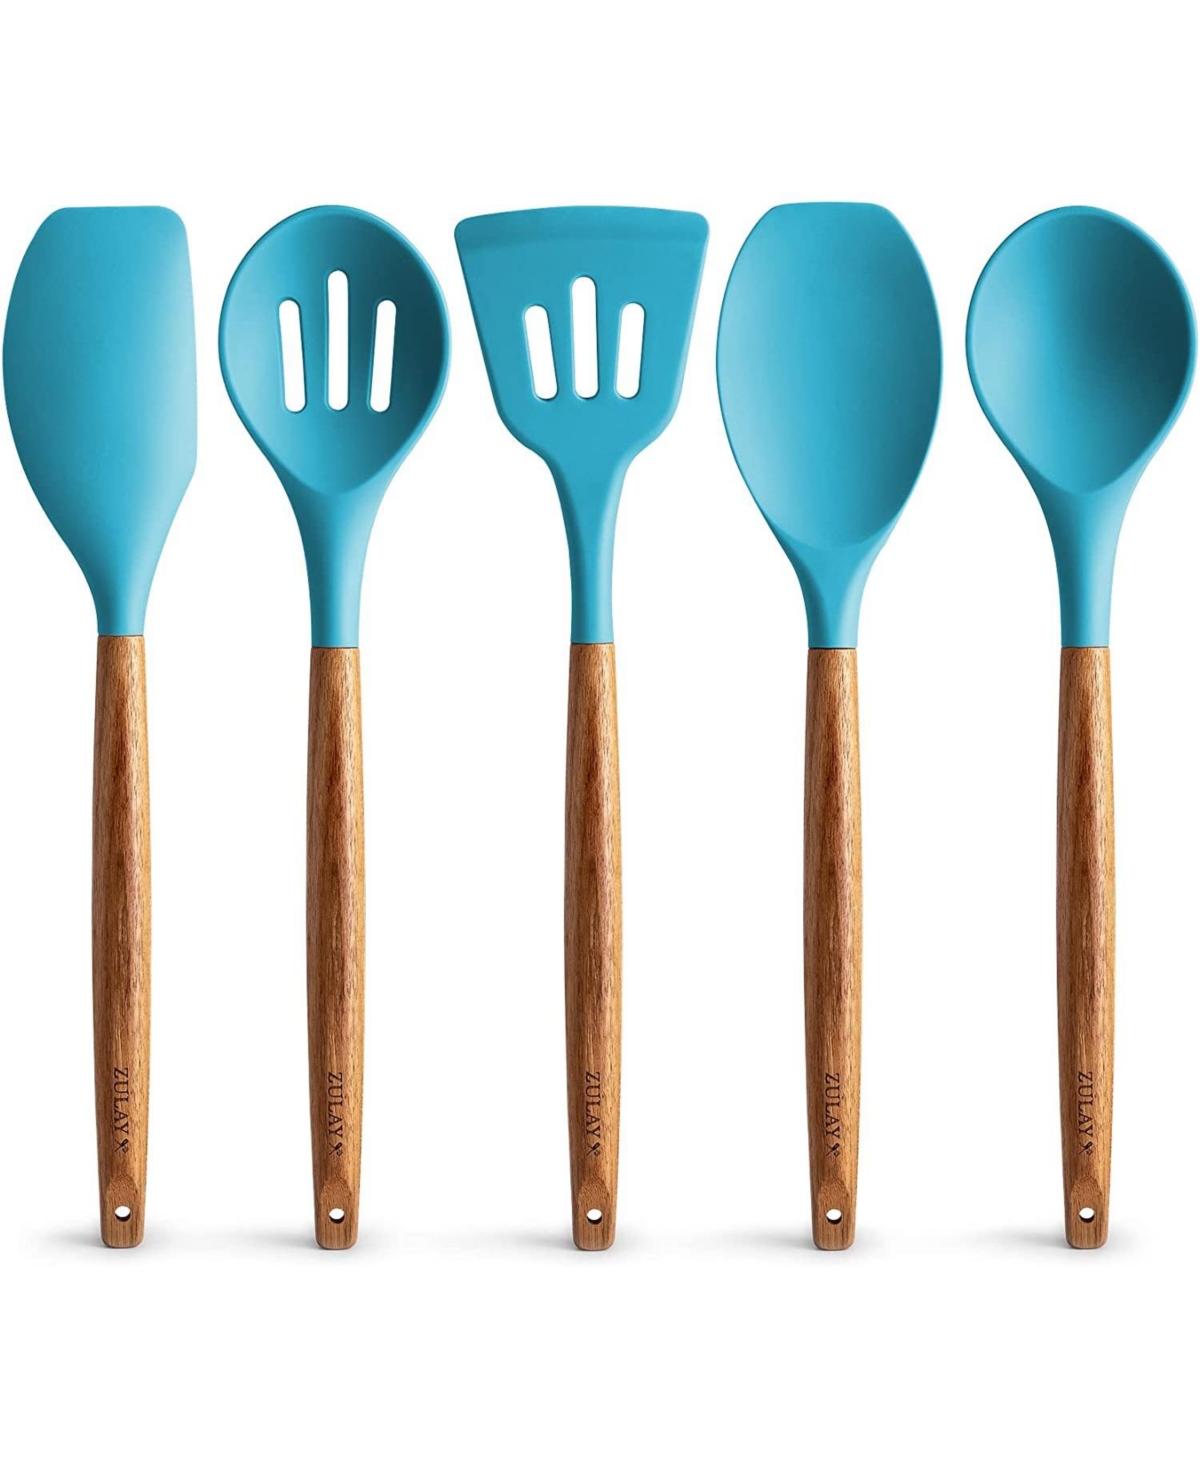 Zulay Kitchen 5 Piece Silicone Utensils Set With Authentic Acacia Wood Handles In Blue